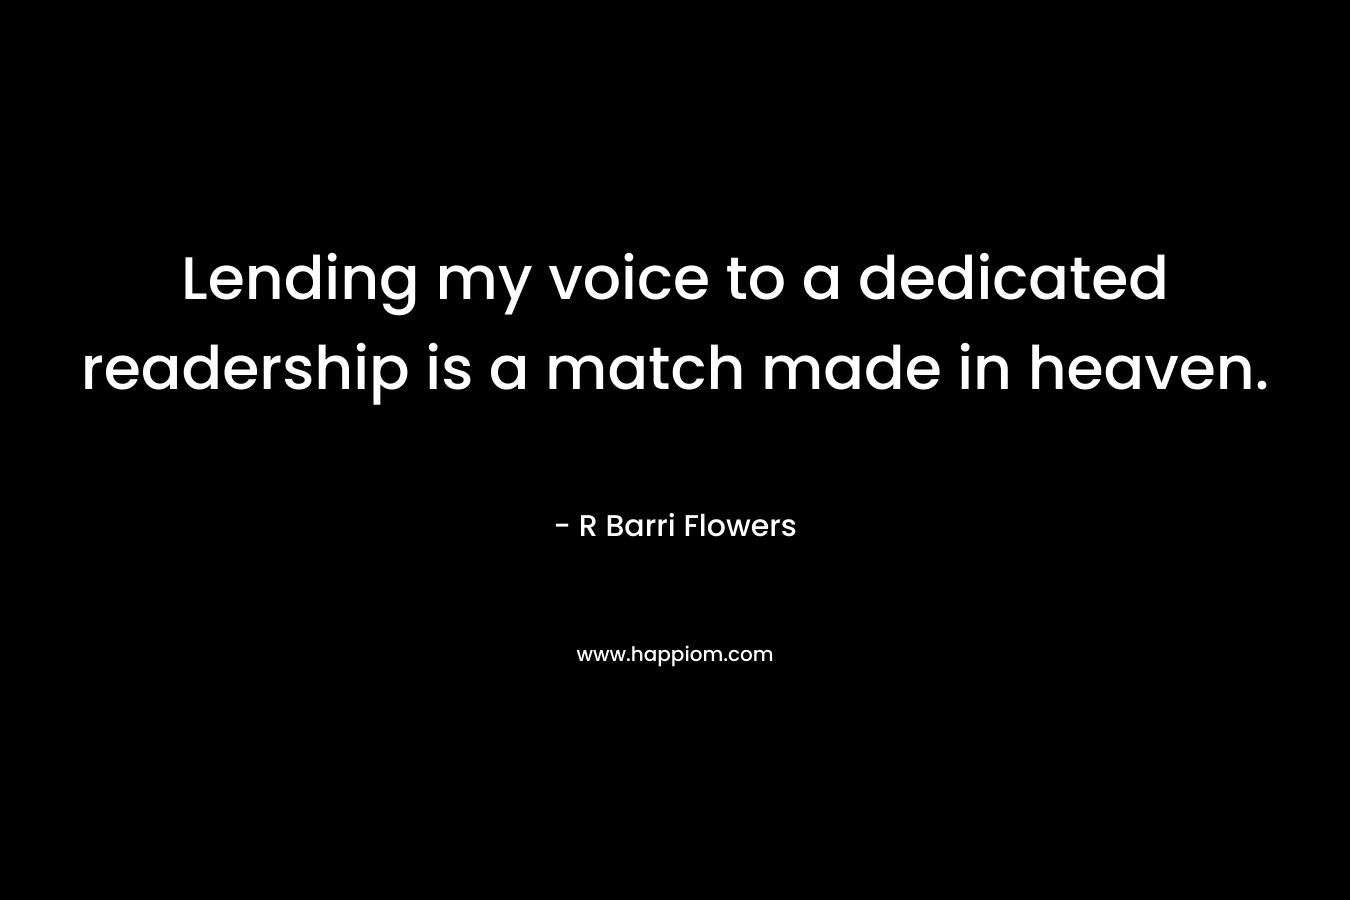 Lending my voice to a dedicated readership is a match made in heaven. – R Barri Flowers